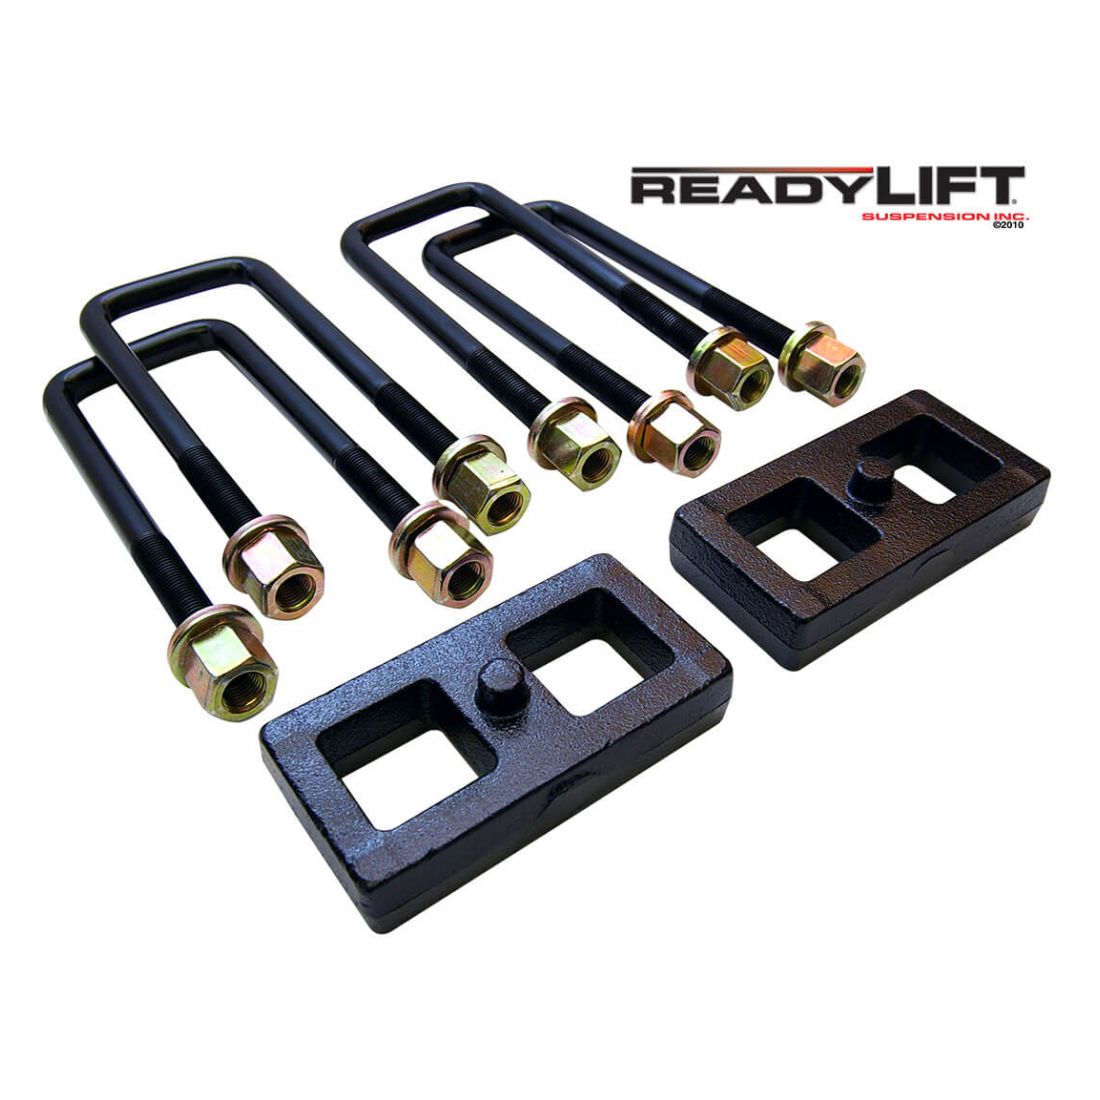 Rugged Off Road 7-7001 1 Rear Block Kit for Tundra and Tacoma 2/4WD 